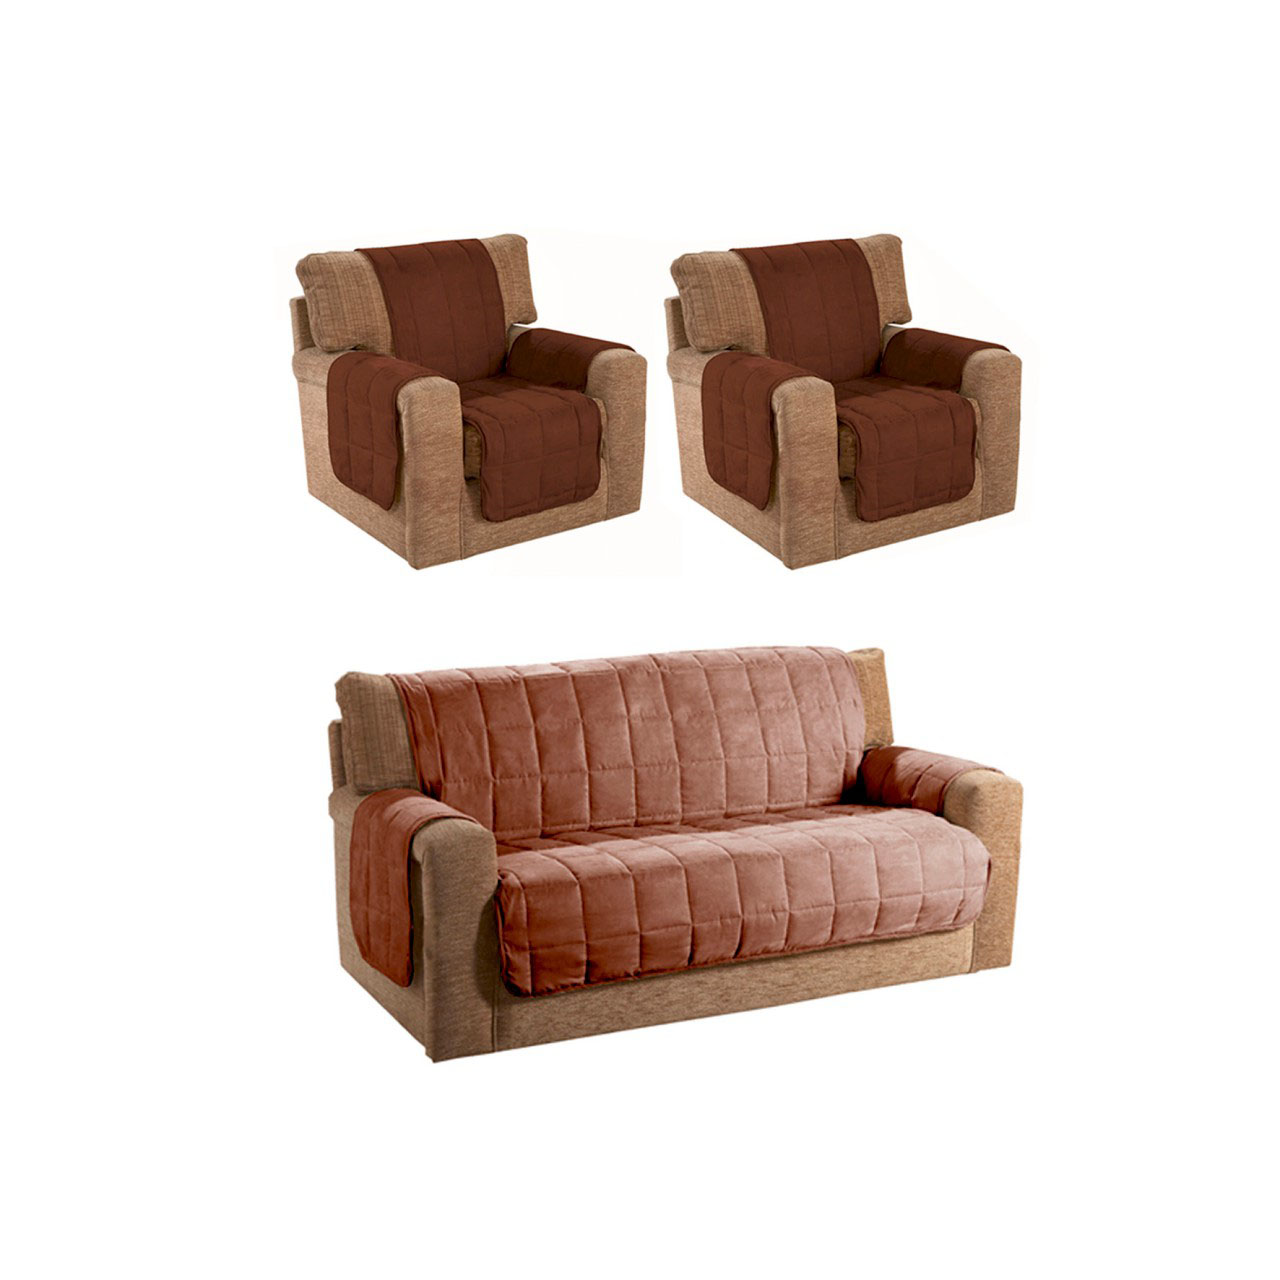 Faux Suede Quilted Furniture Covers - 3-Seater Set